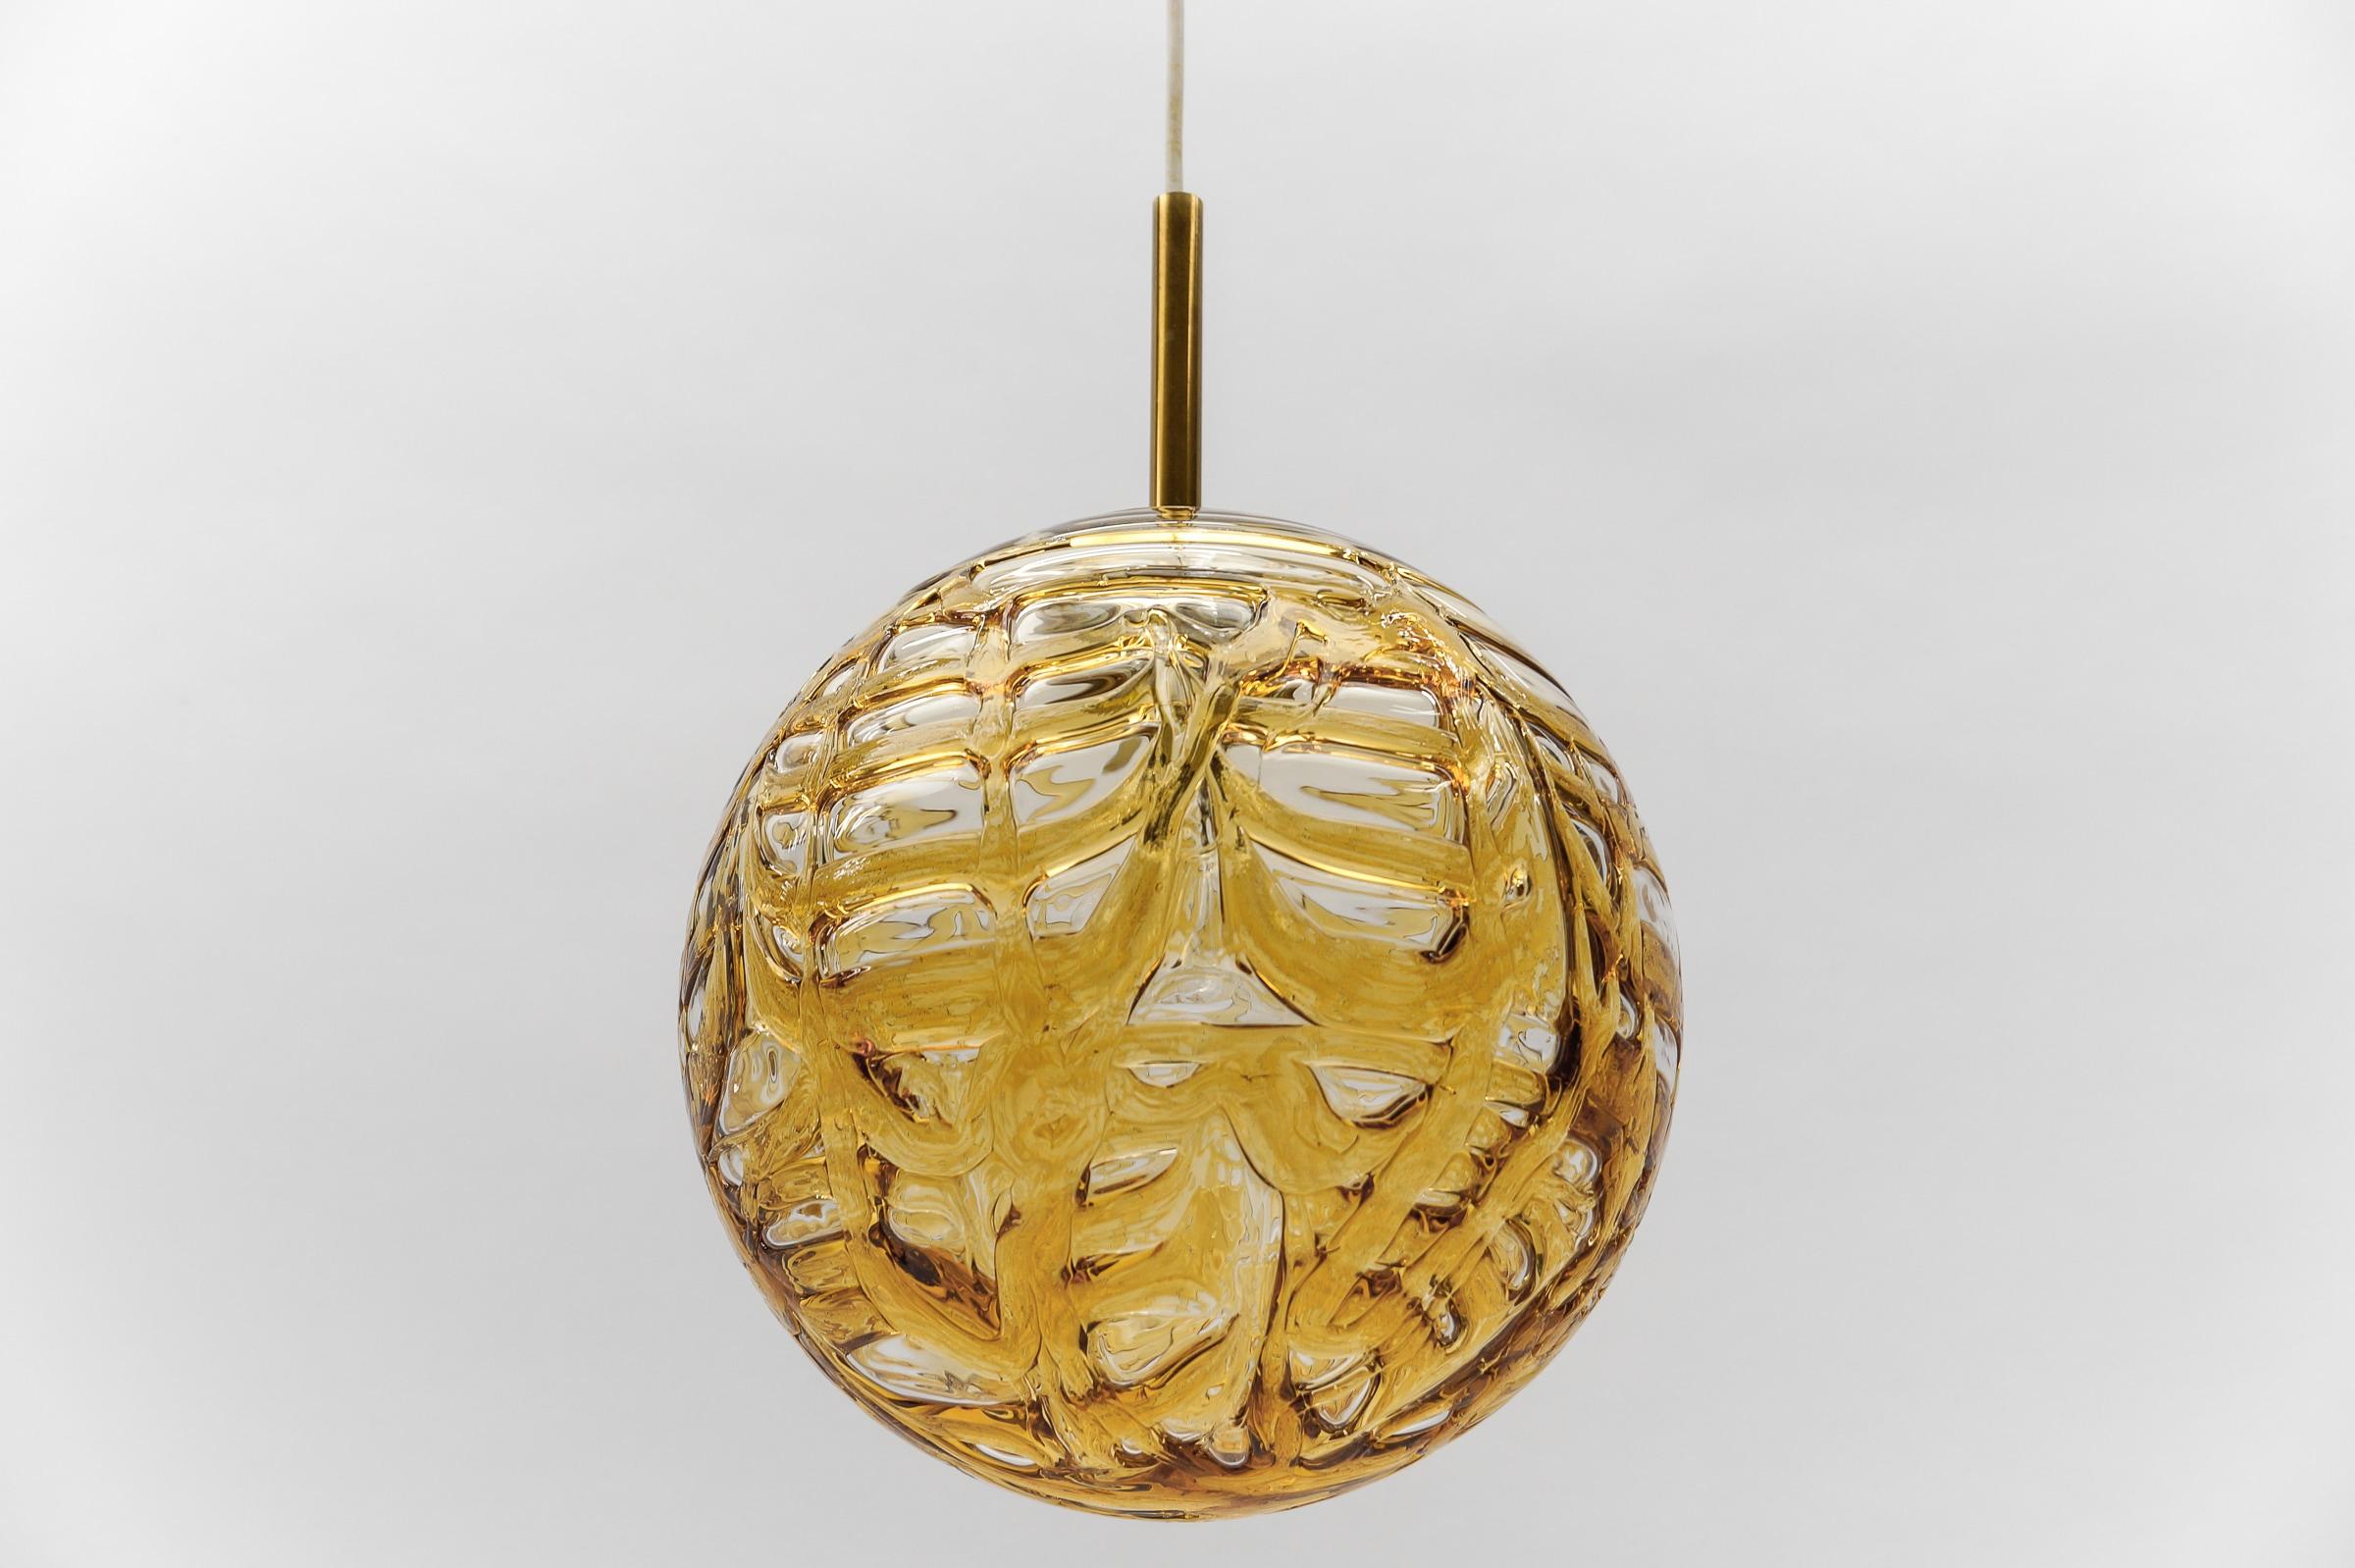 Yellow Murano Glass Ball Pendant Lamp by Doria, - 1960s Germany For Sale 1